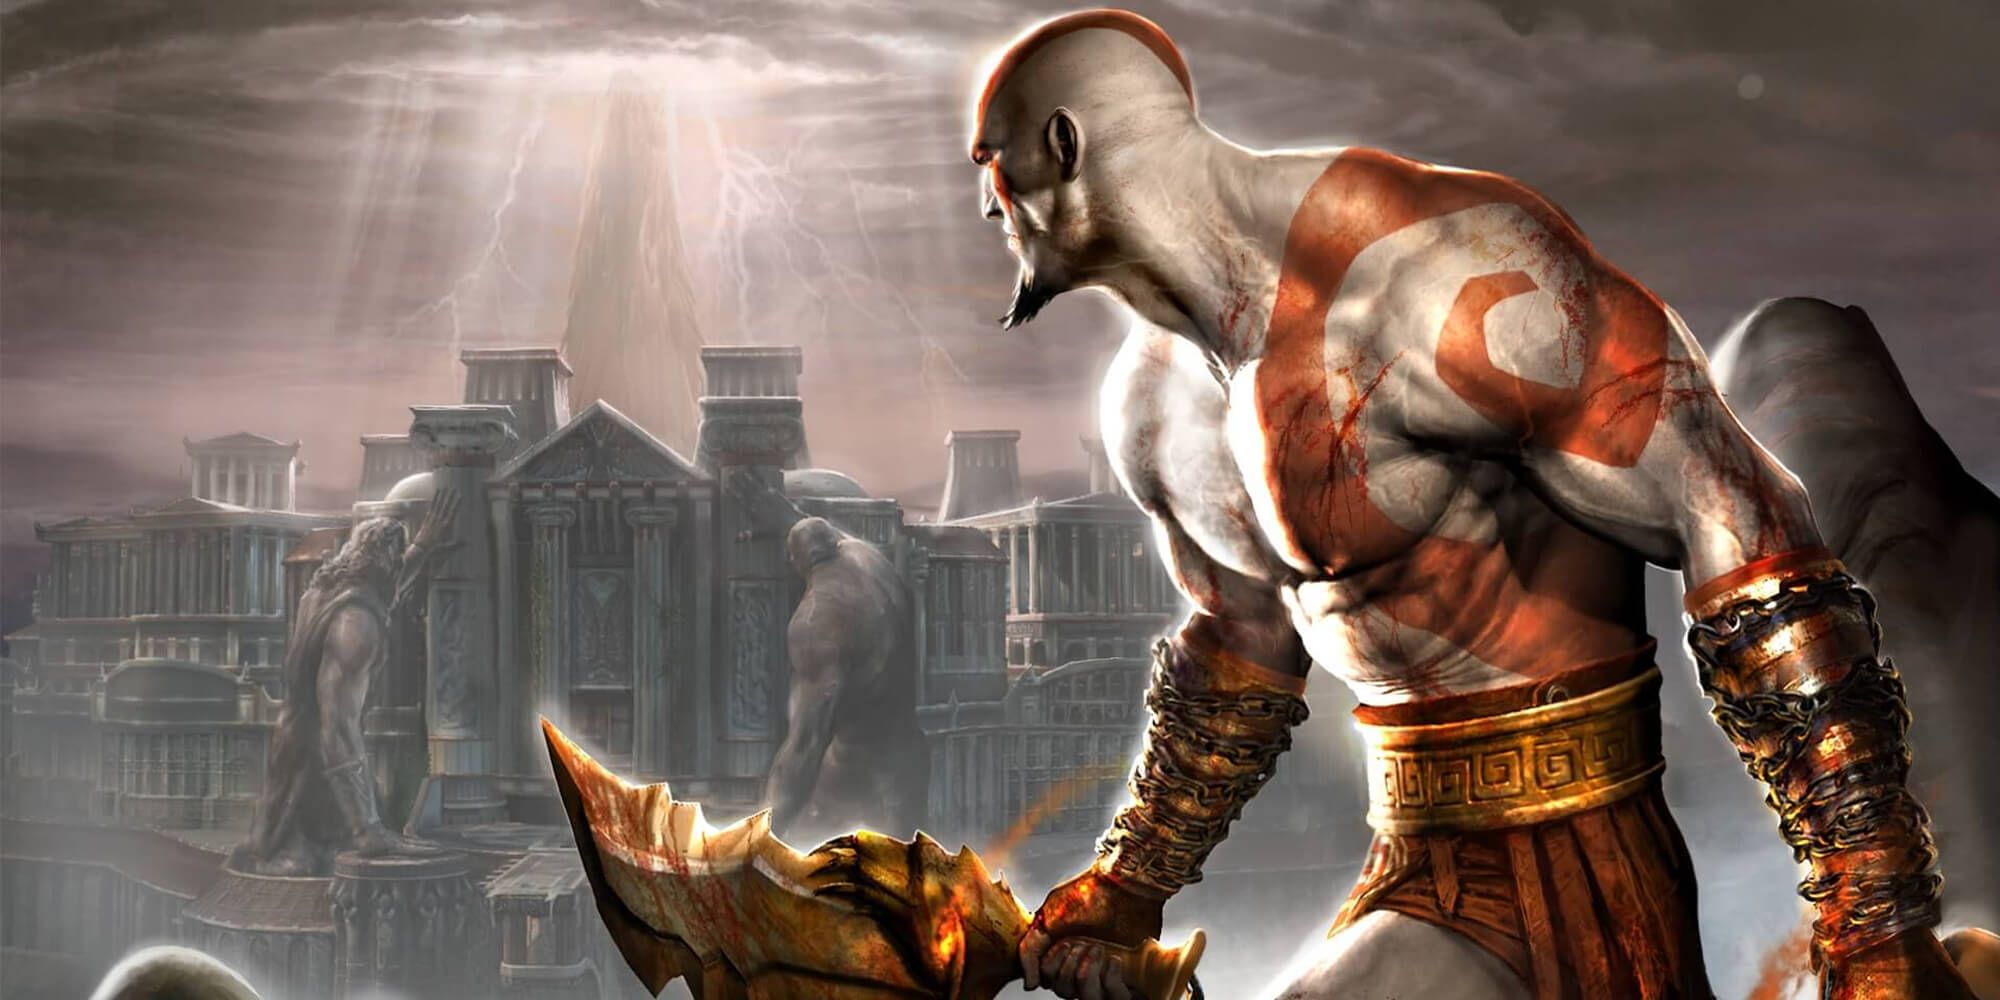 Kratos Begins His Quest To Change His Fate